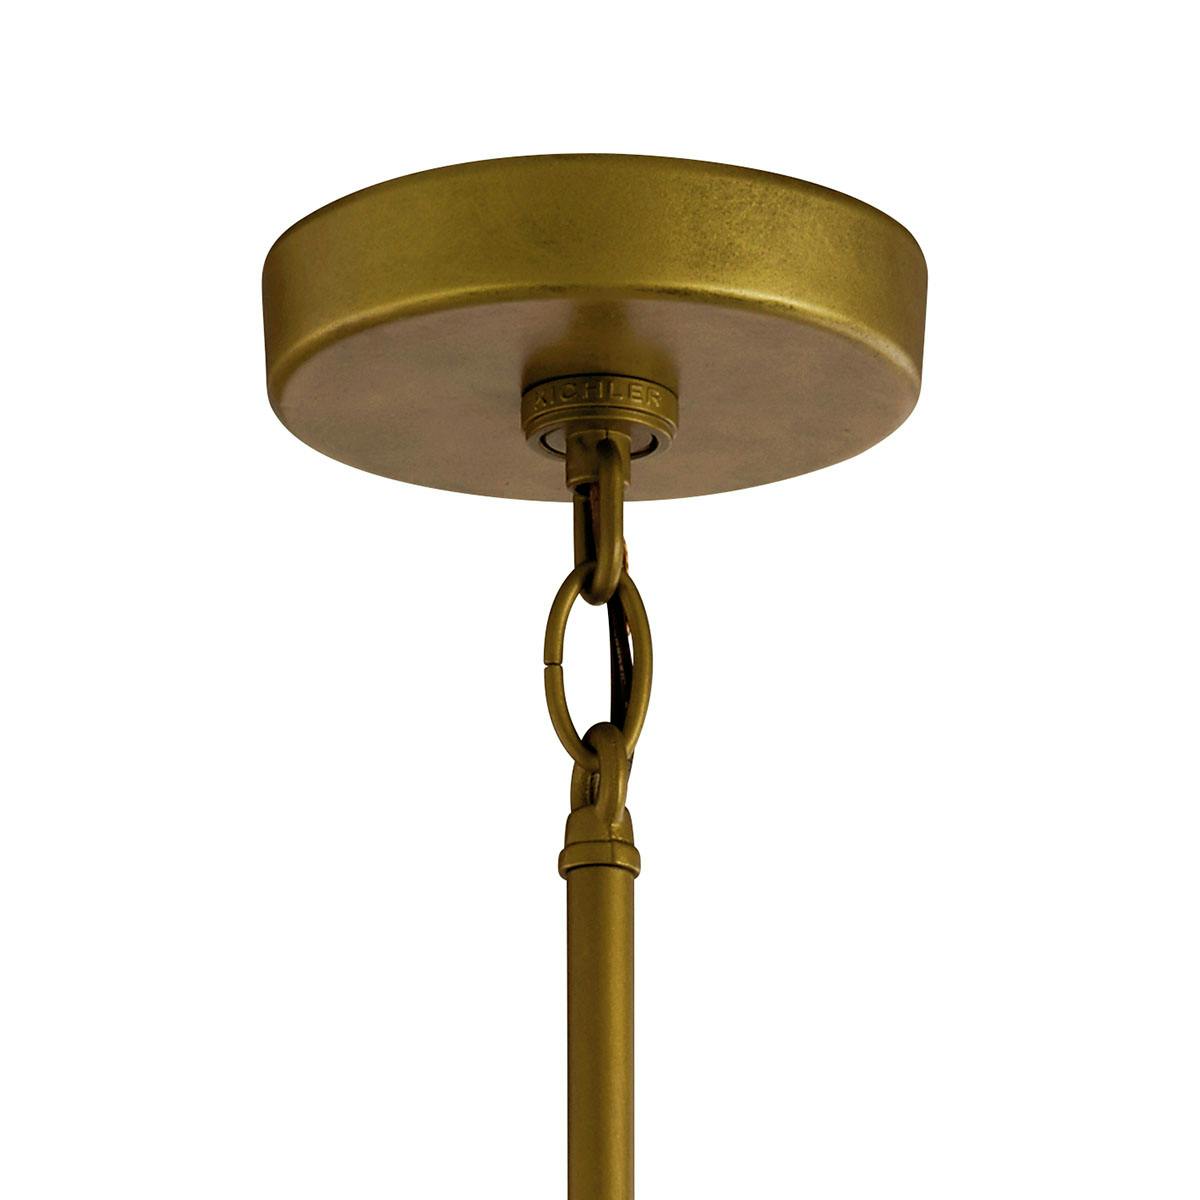 Canopy for the Camillo 18" 1 Light Hanging Pendant Brass on a white background